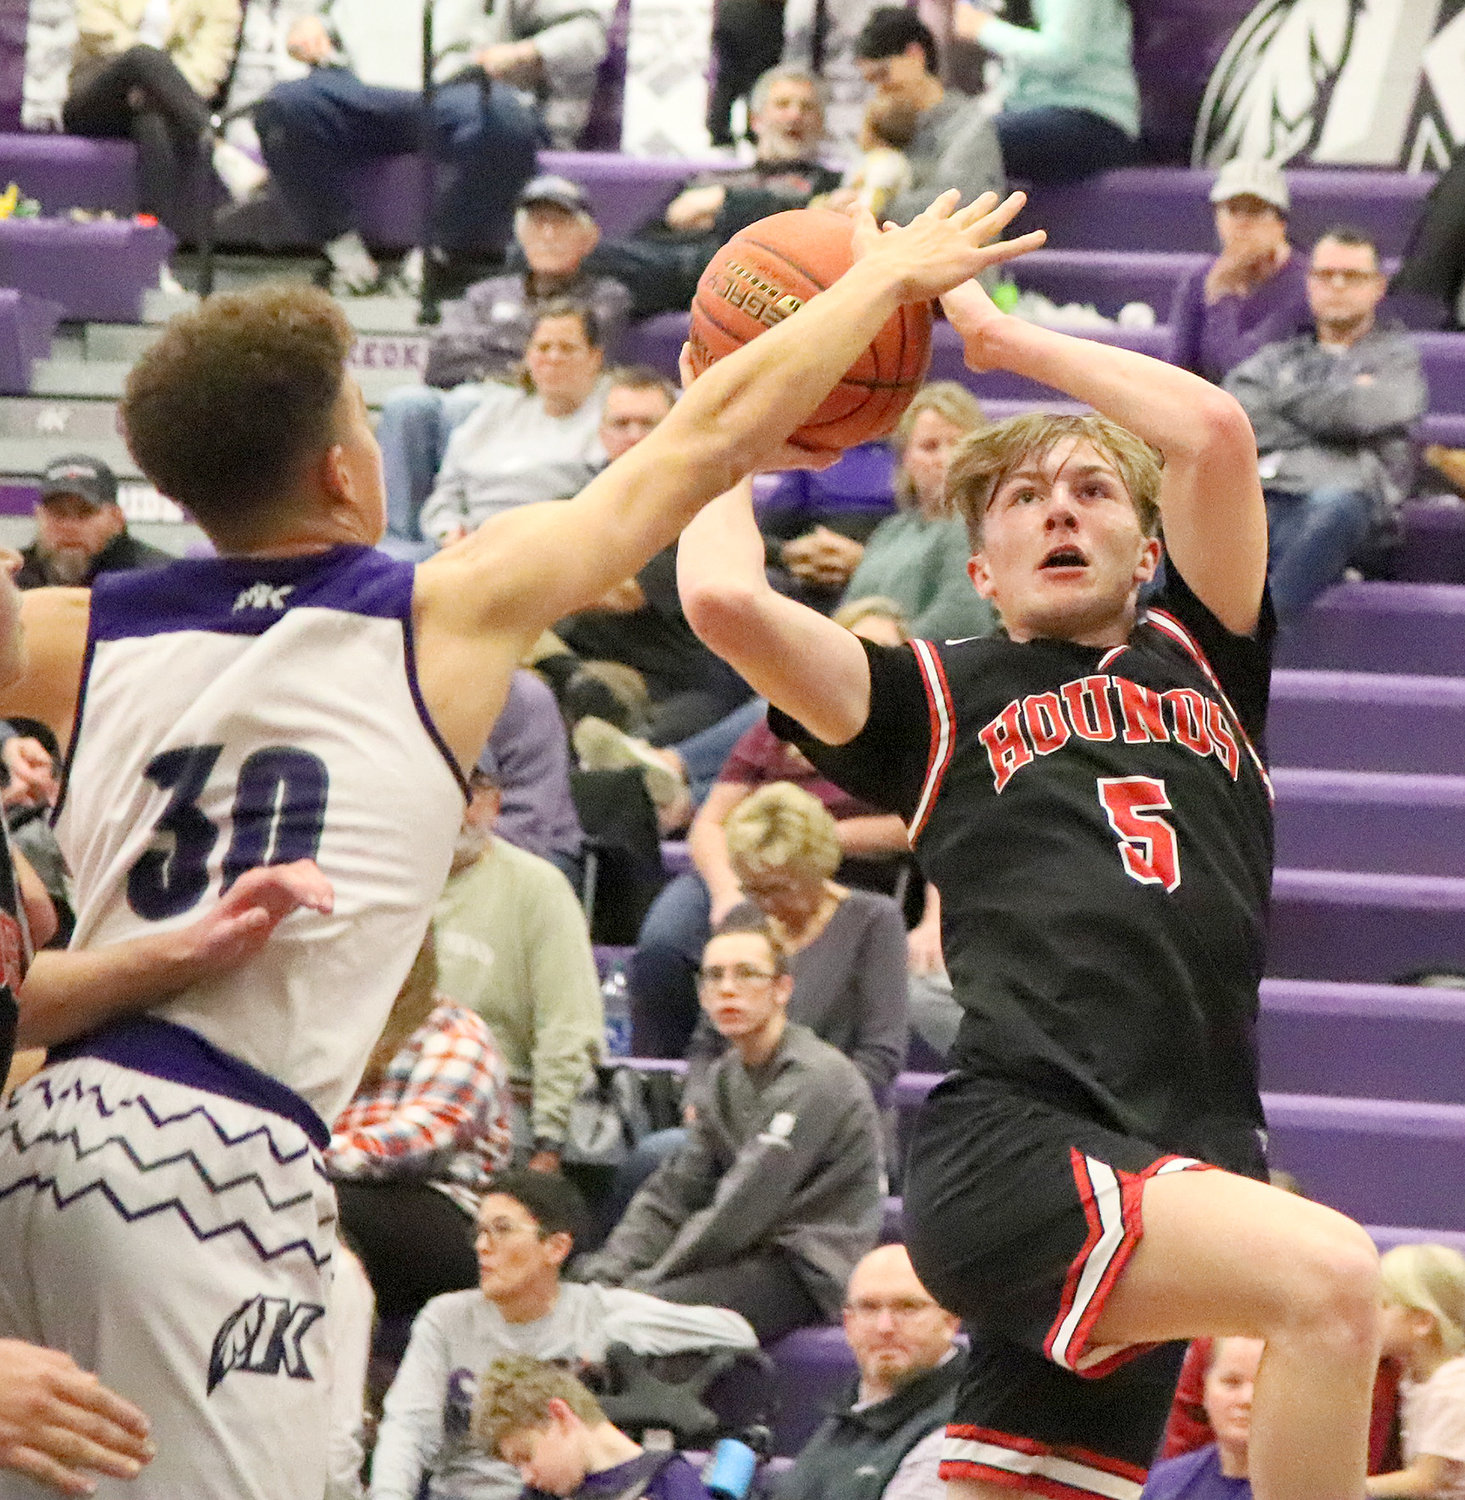 Carson Rashid (5) slides down the left side of the lane and hits a floater while Keokuk's Brenton Hoard tries to defend.